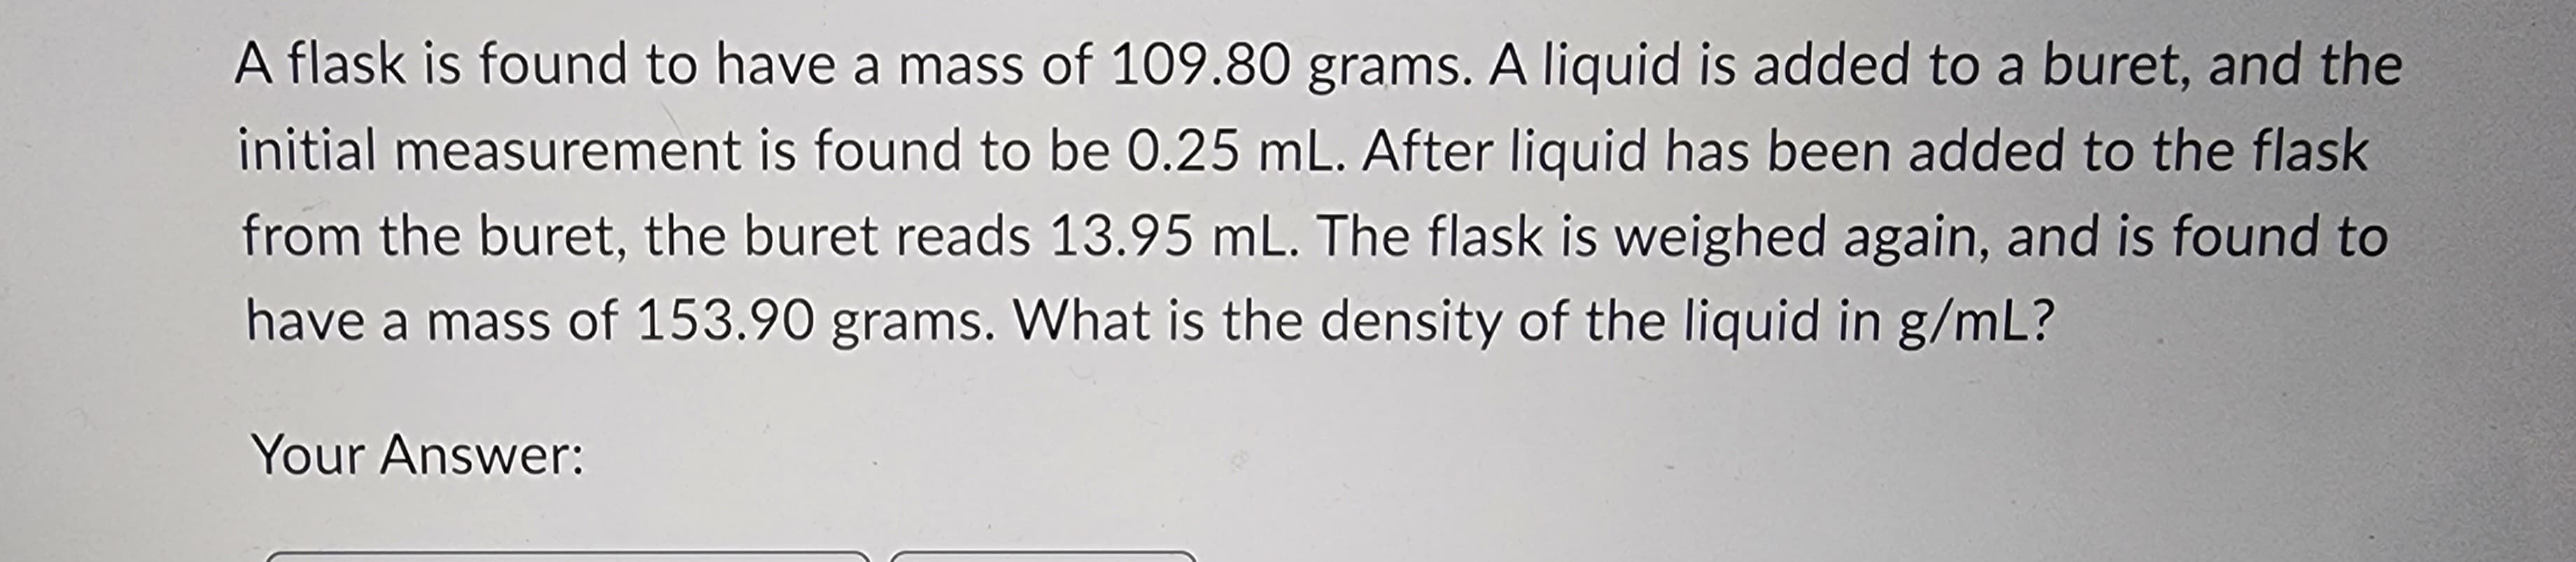 A flask is found to have a mass of 109.80 grams. A liquid is added to a buret, and the
initial measurement is found to be 0.25 mL. After liquid has been added to the flask
from the buret, the buret reads 13.95 mL. The flask is weighed again, and is found to
have a mass of 153.90 grams. What is the density of the liquid in g/mL?
Your Answer: